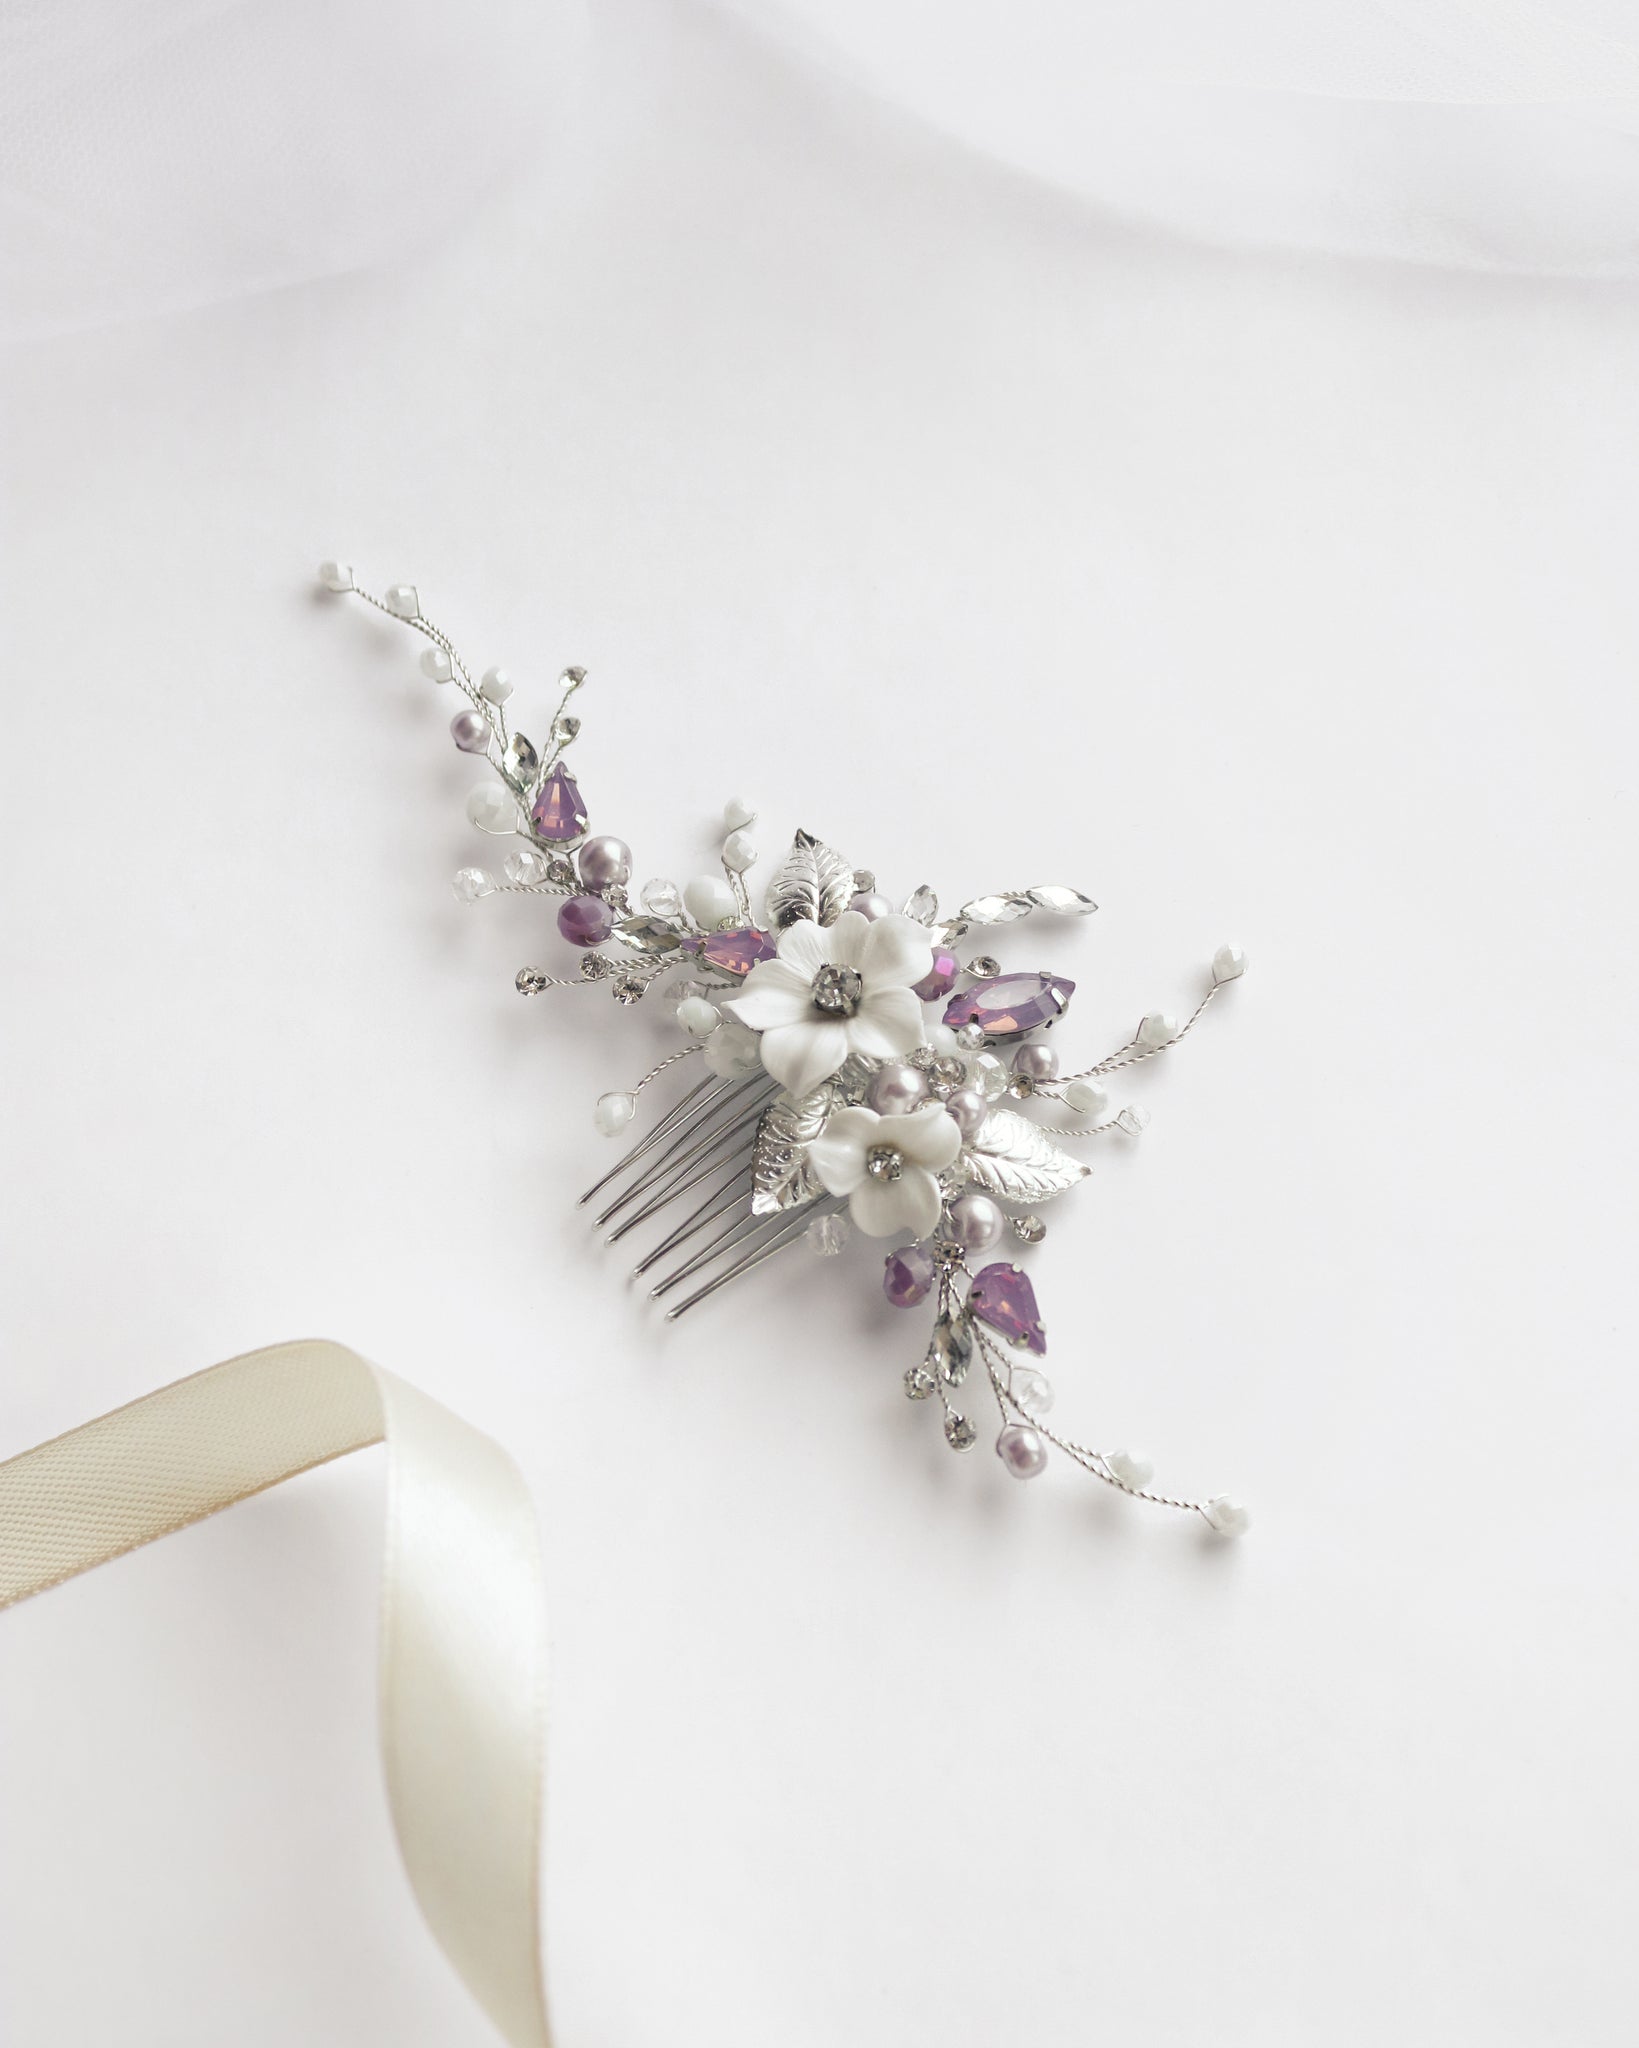 Crystal wedding hair comb for bridal hairstyle